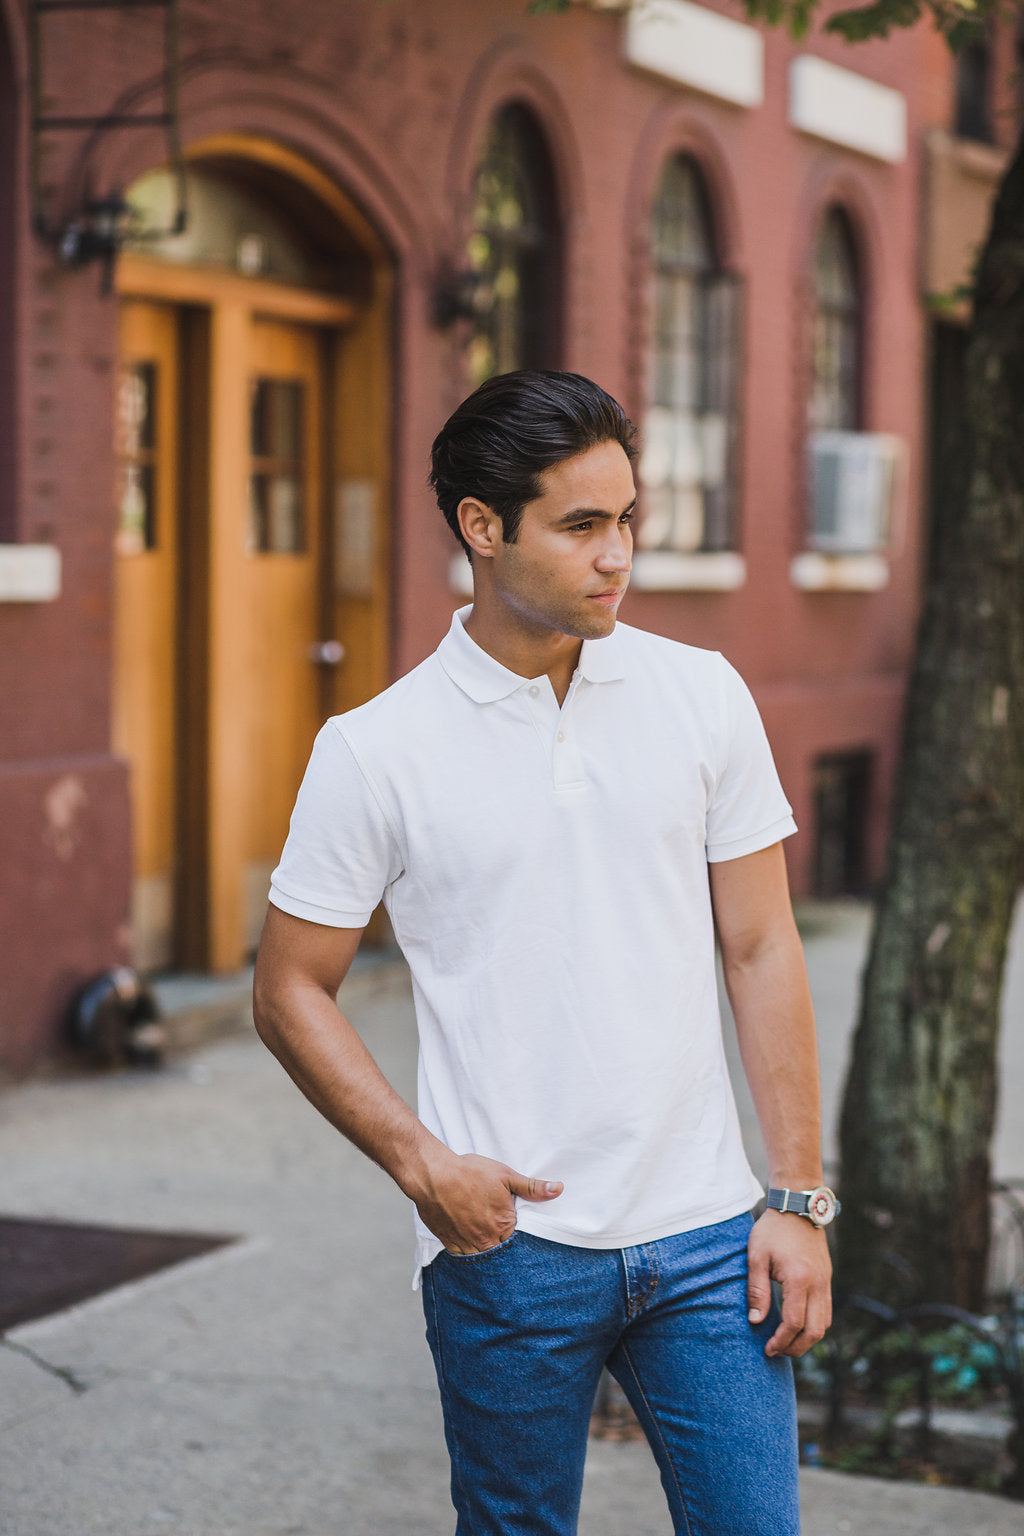 How to Fit & Style Polo Shirts on Short Men